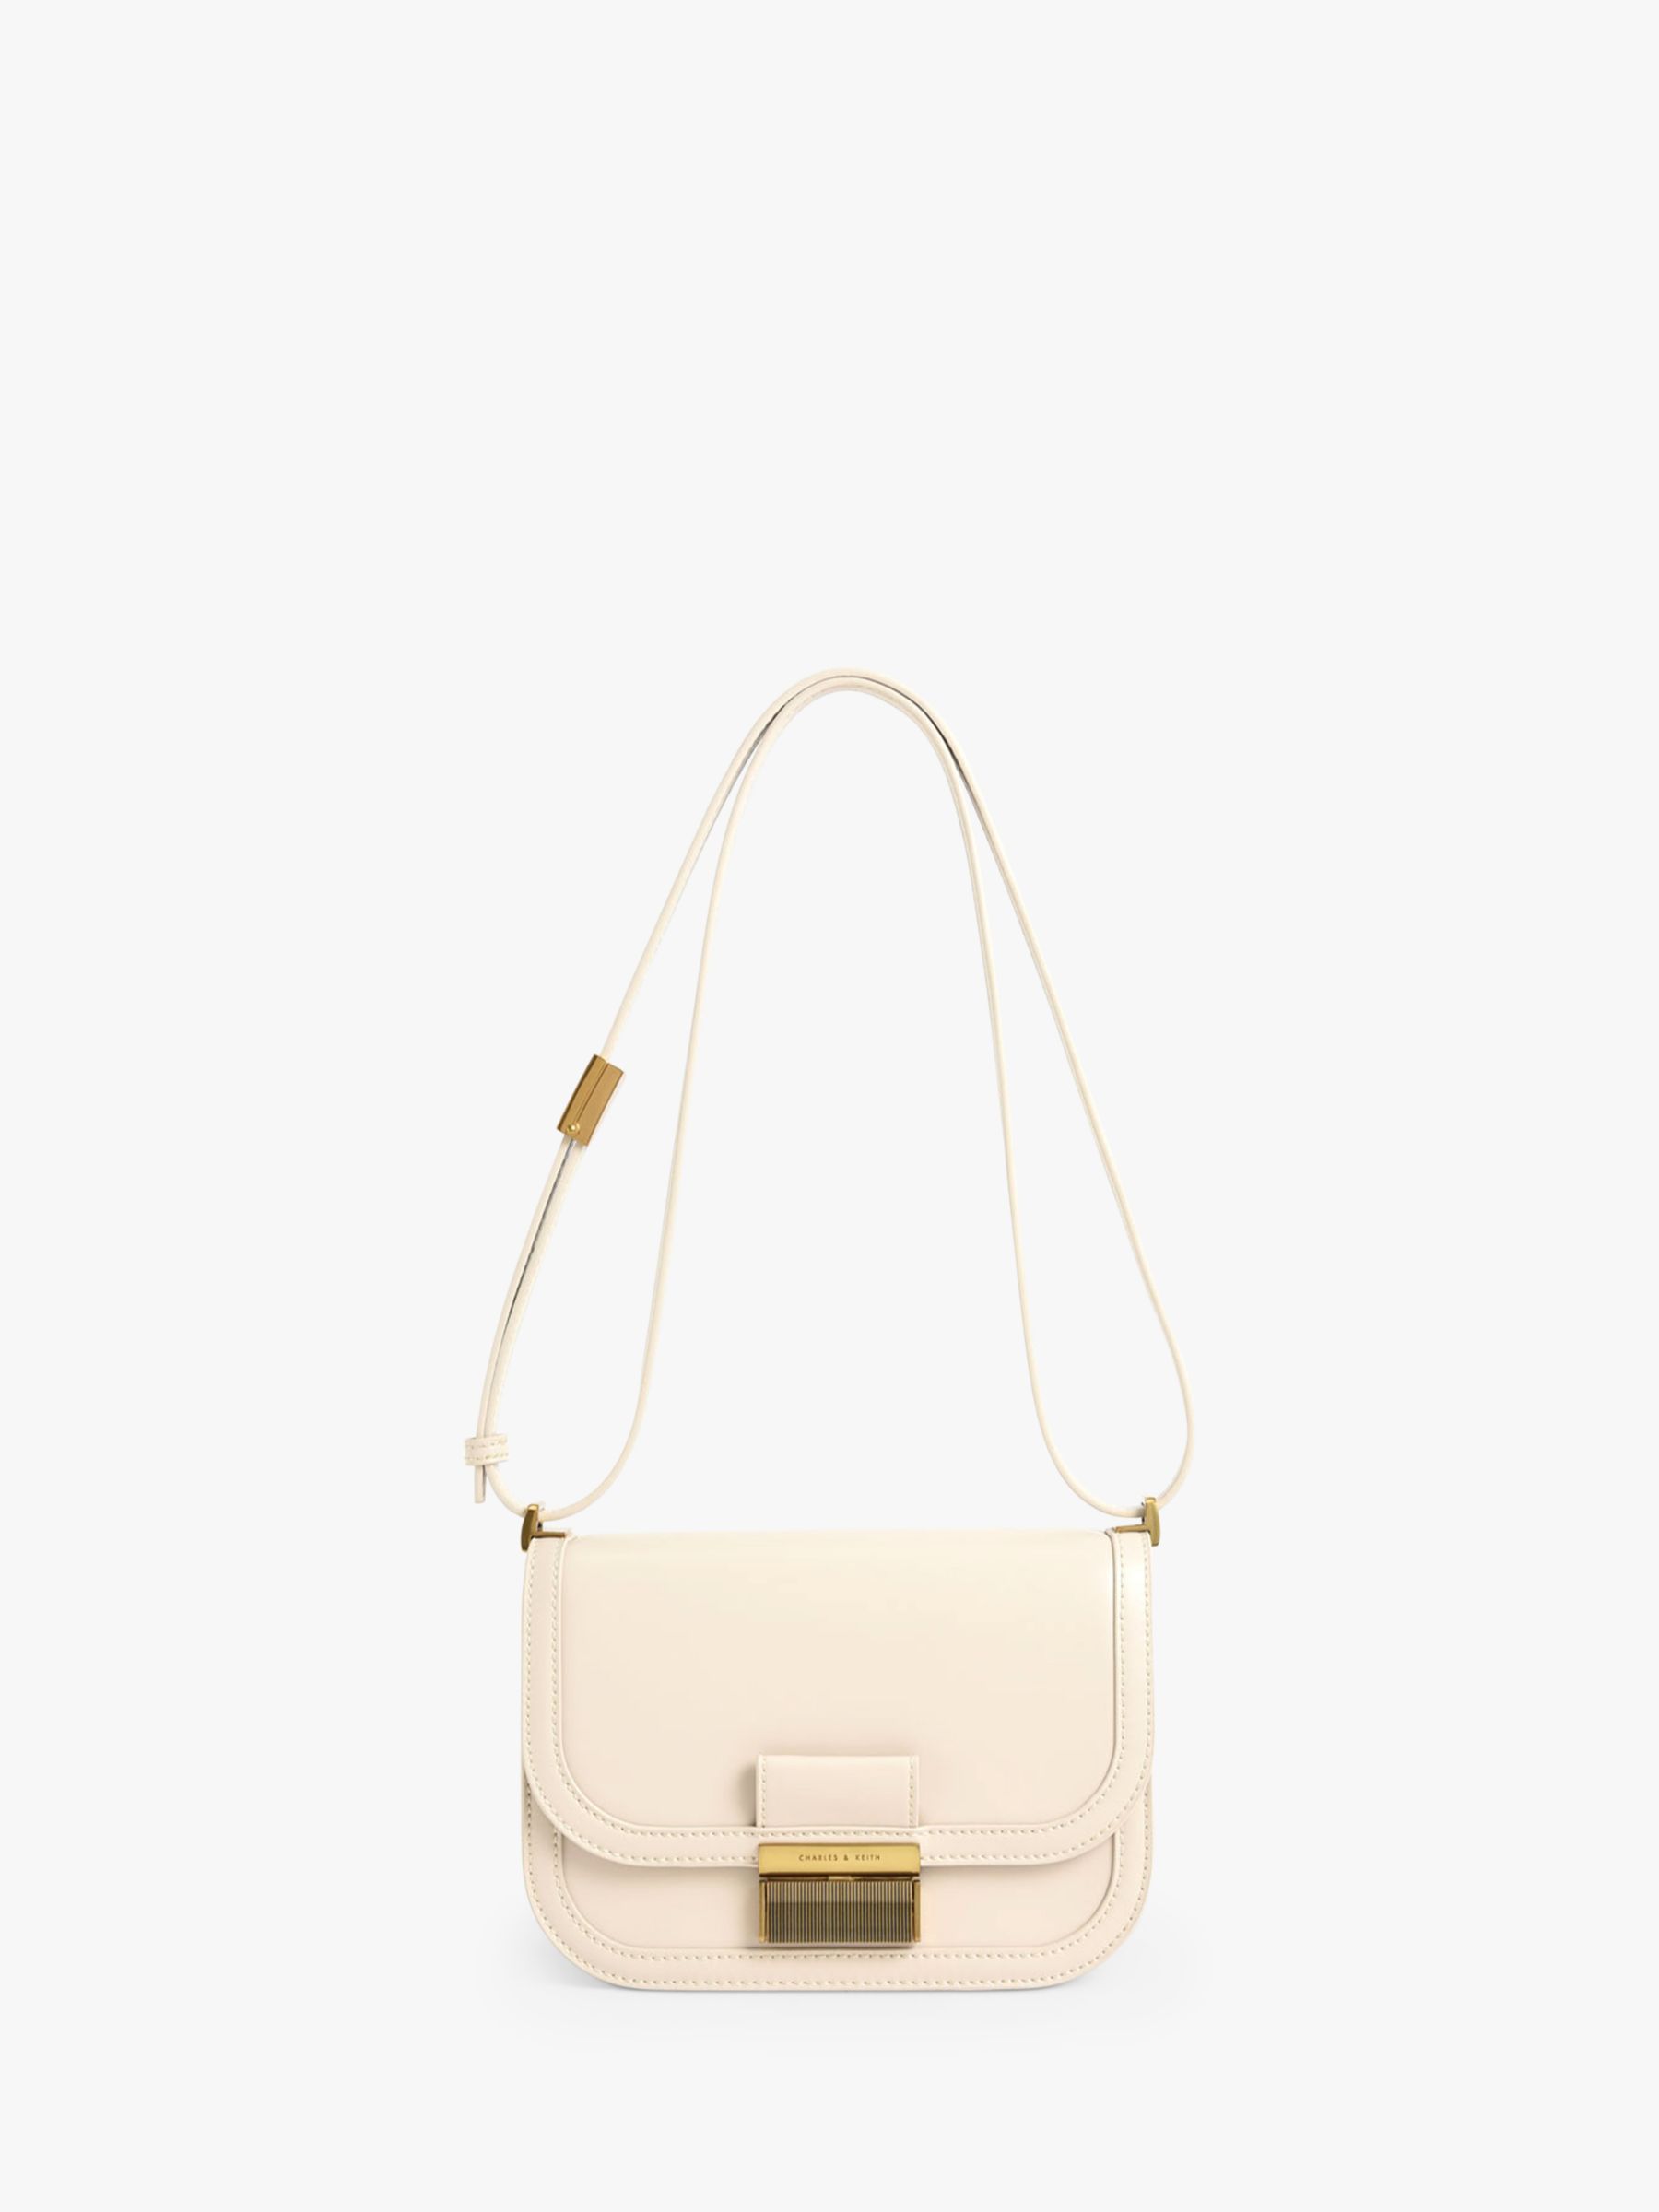 CHARLES & KEITH Charlot Faux Leather Cross Body Bag, Ivory at John